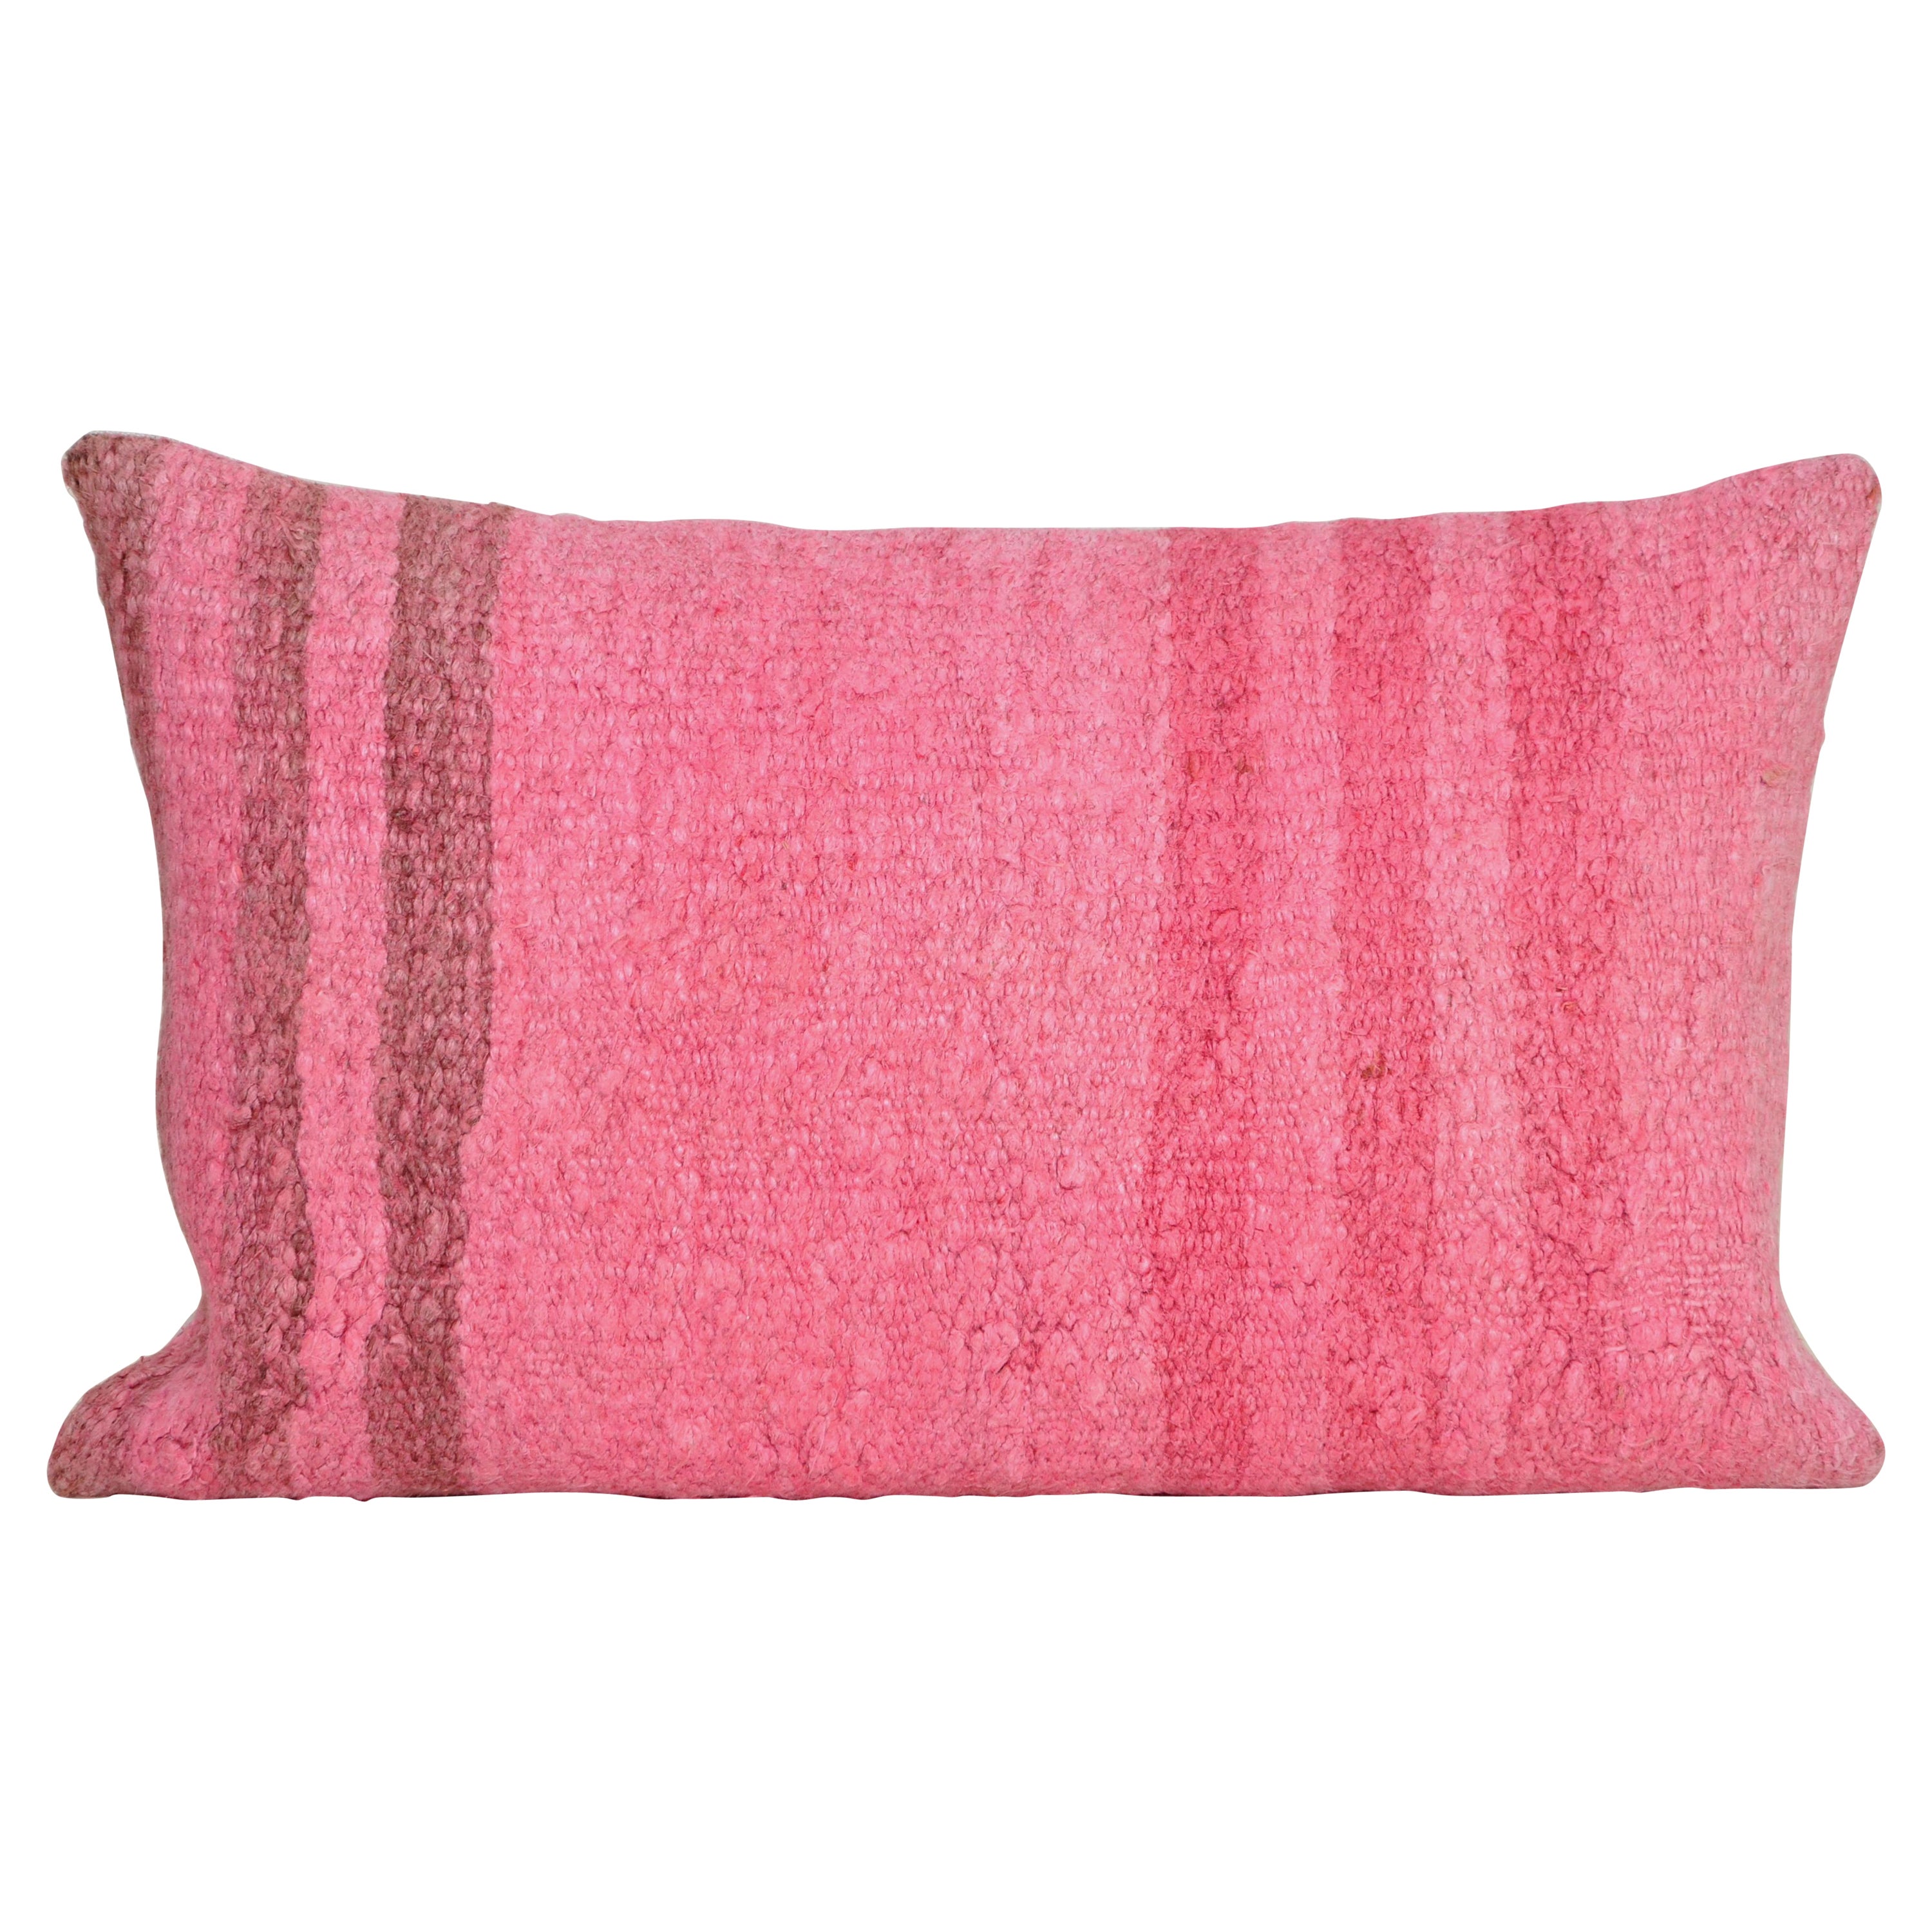 Vintage Kilim Rug Pillow with Irish Linen by Katie Larmour Cushions Pink For Sale